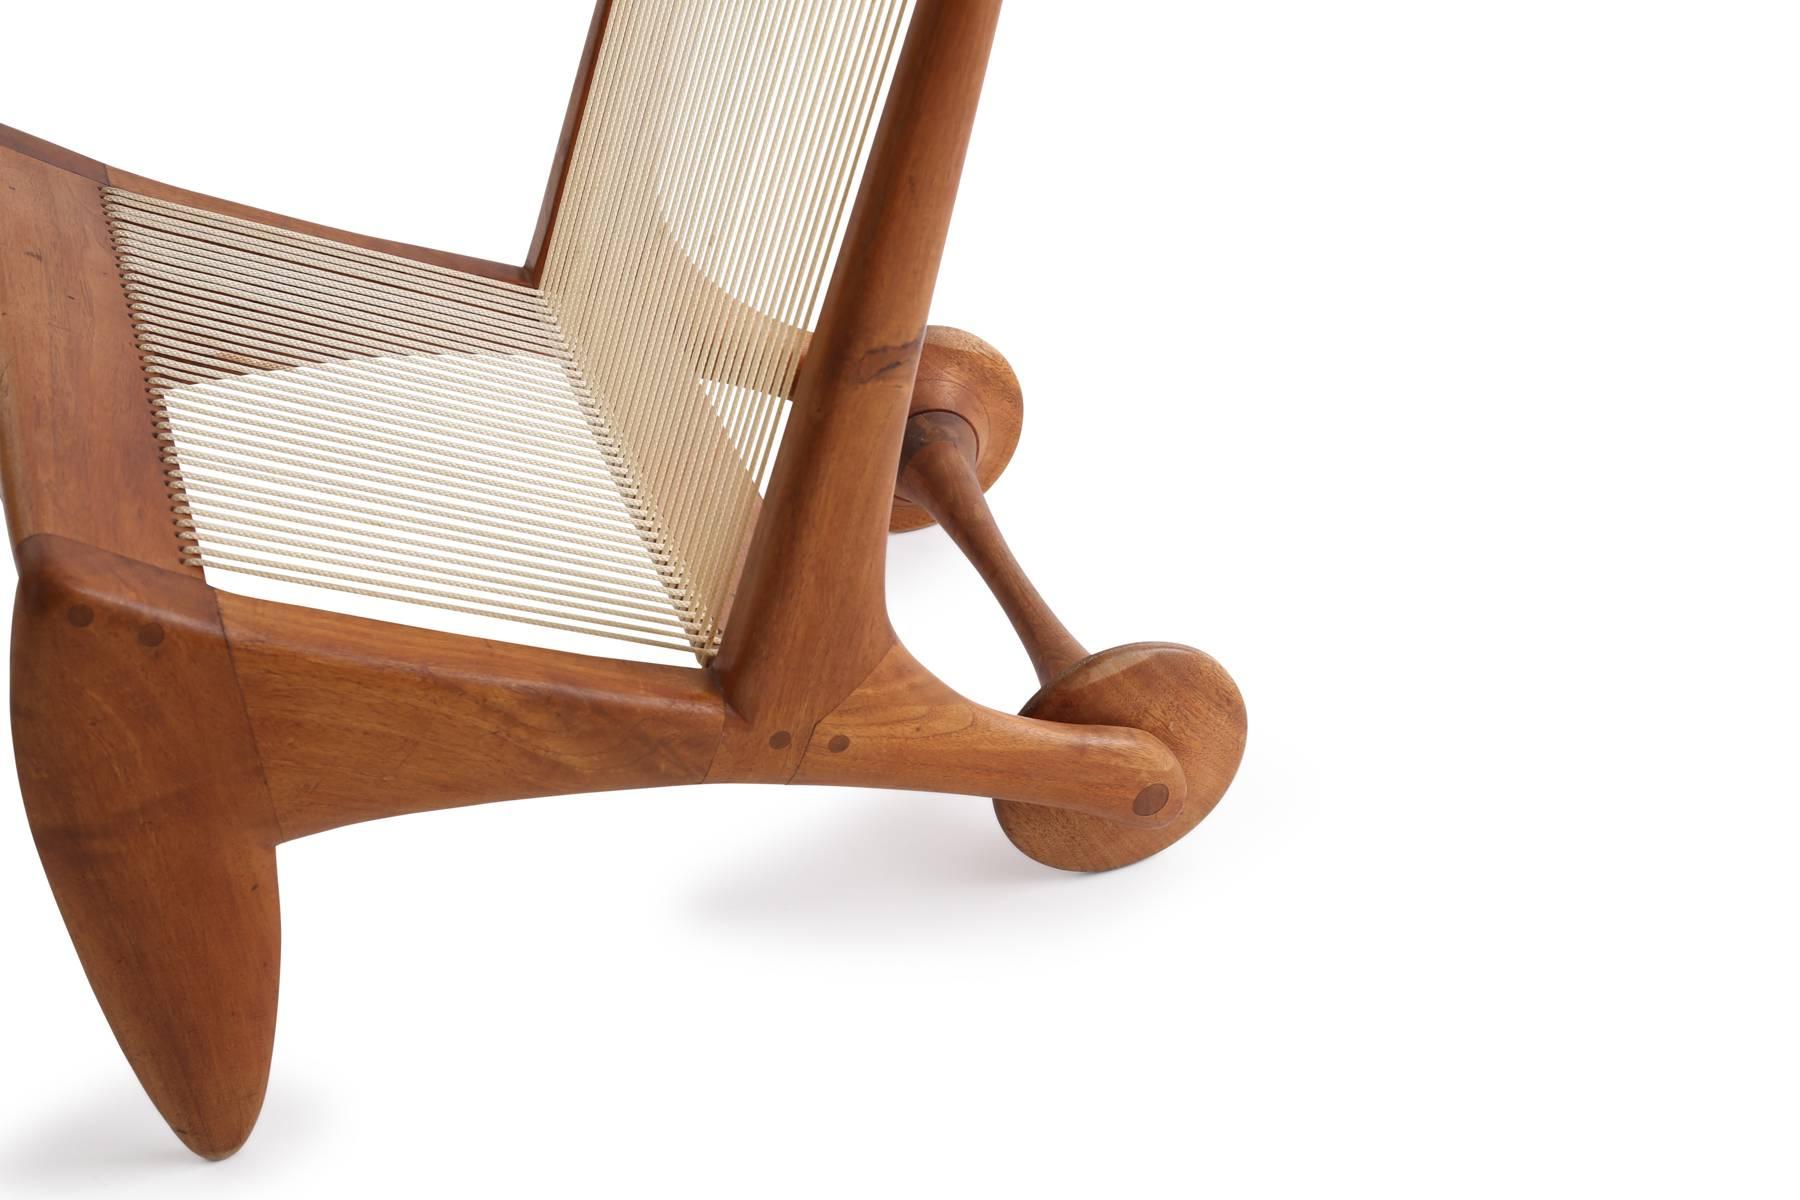 Allen Ditson walnut and cord magazine holder, in the shape of a small chair, circa late 1950s. This all original one-off example is executed in beautifully grained walnut and was purchased directly from the family that it was originally commissioned